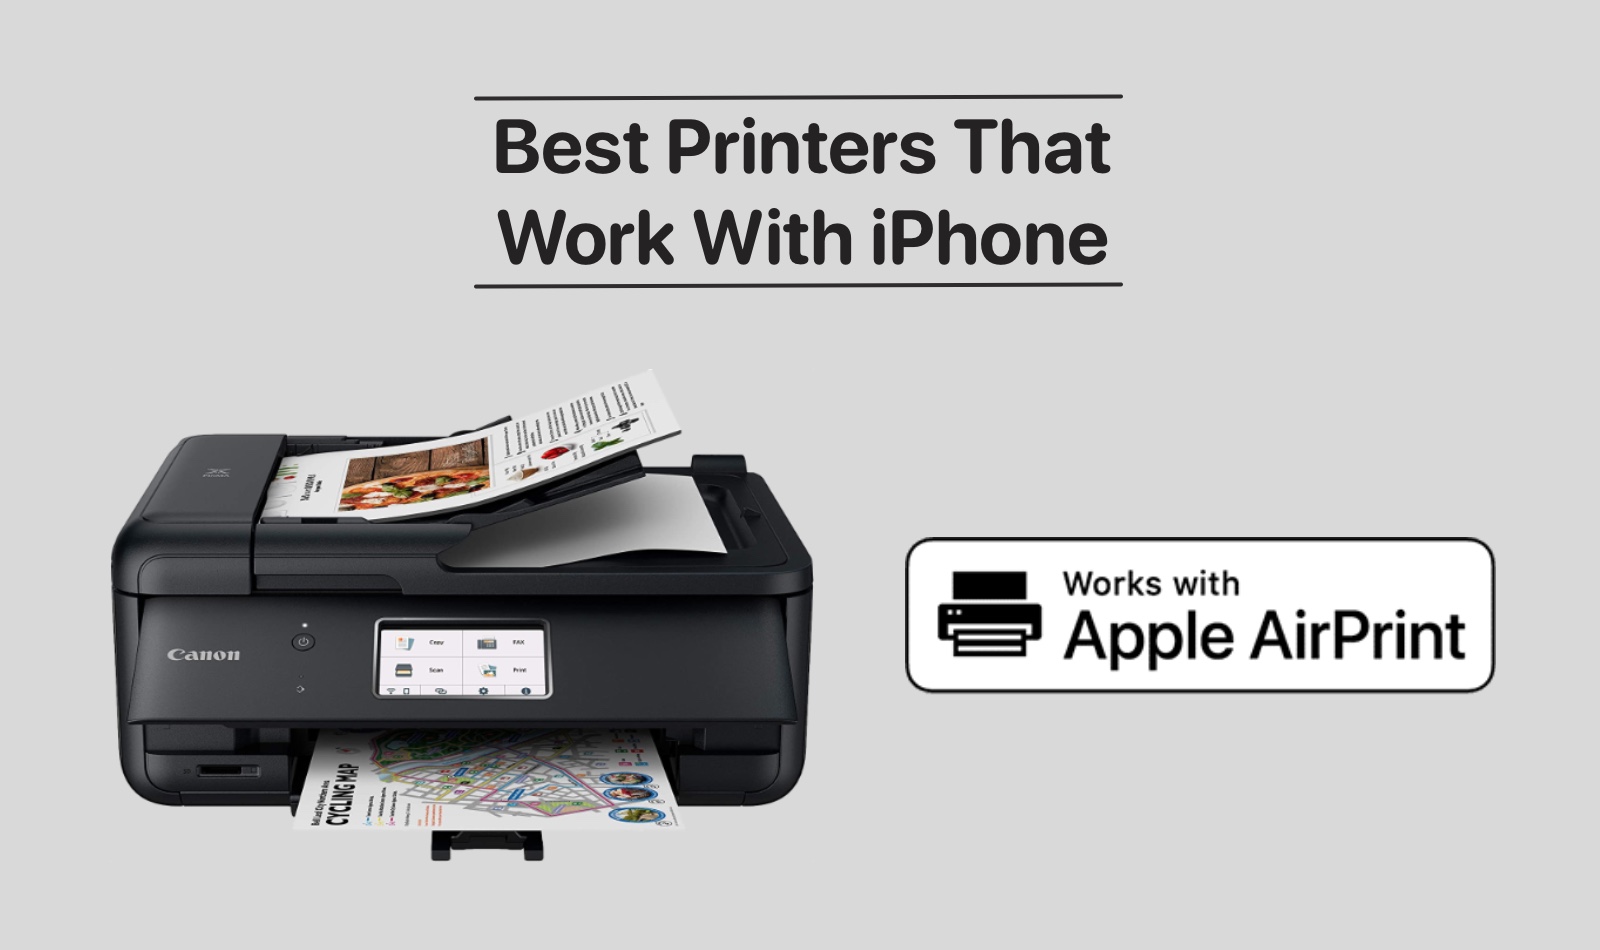 Monet røveri udstrømning Best AirPrint Enabled Printers You Can Use With iPhone Or iPad - iOS Hacker